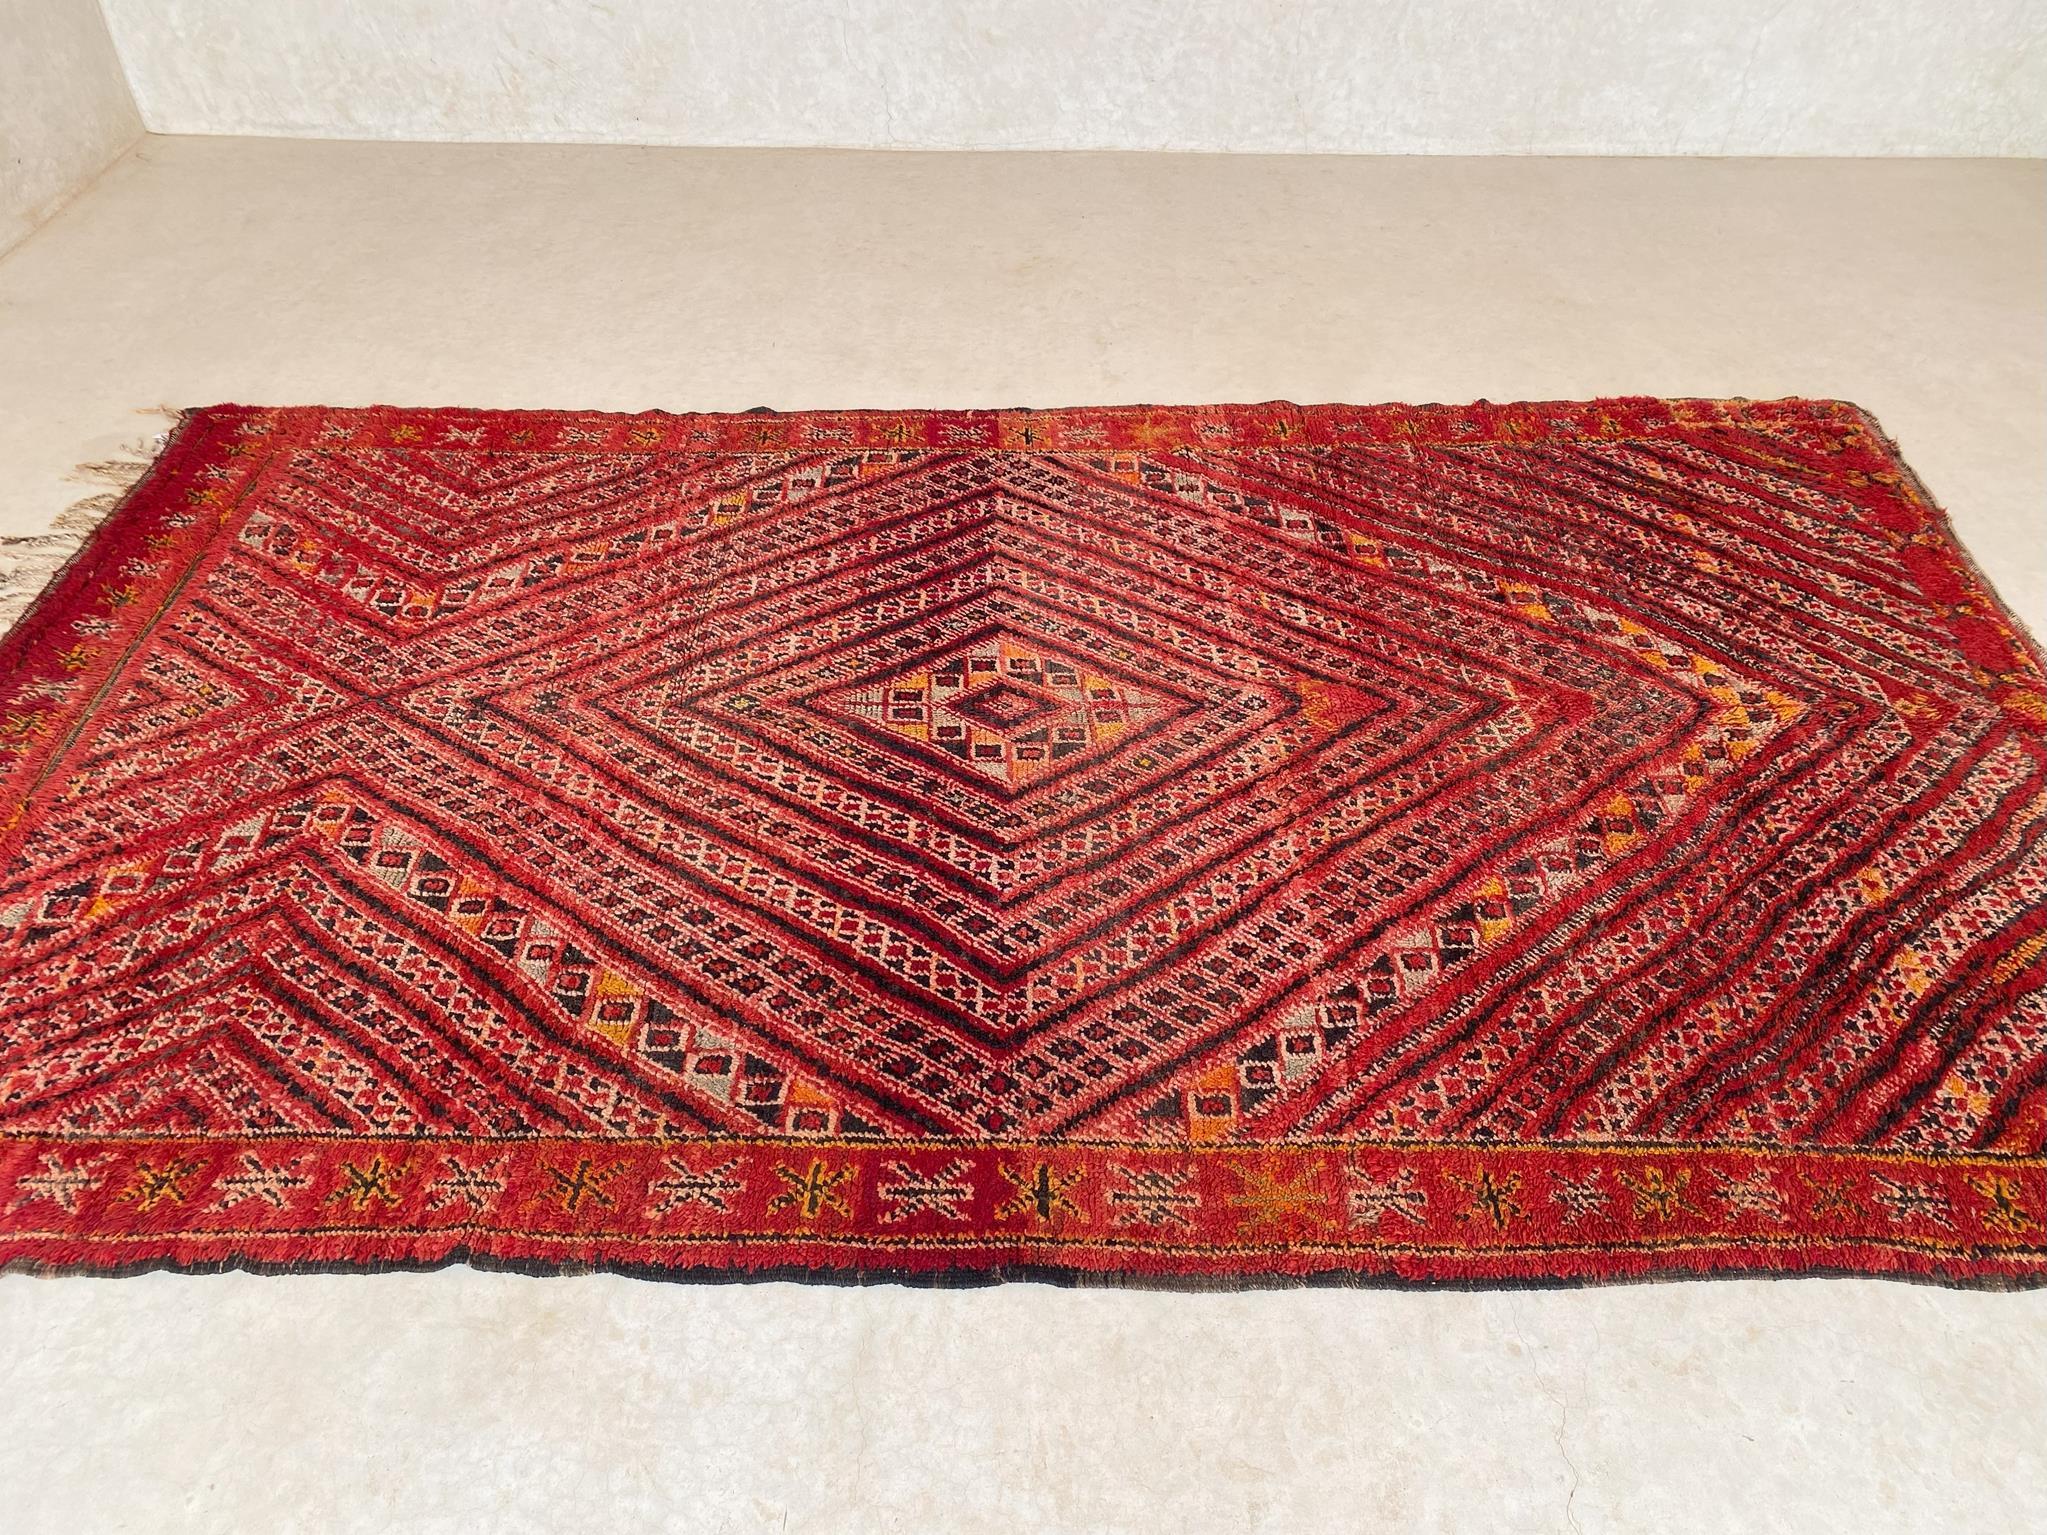 Hand-Woven Vintage Moroccan Zayane rug - Red - 6.7x11.3feet / 205x344cm For Sale